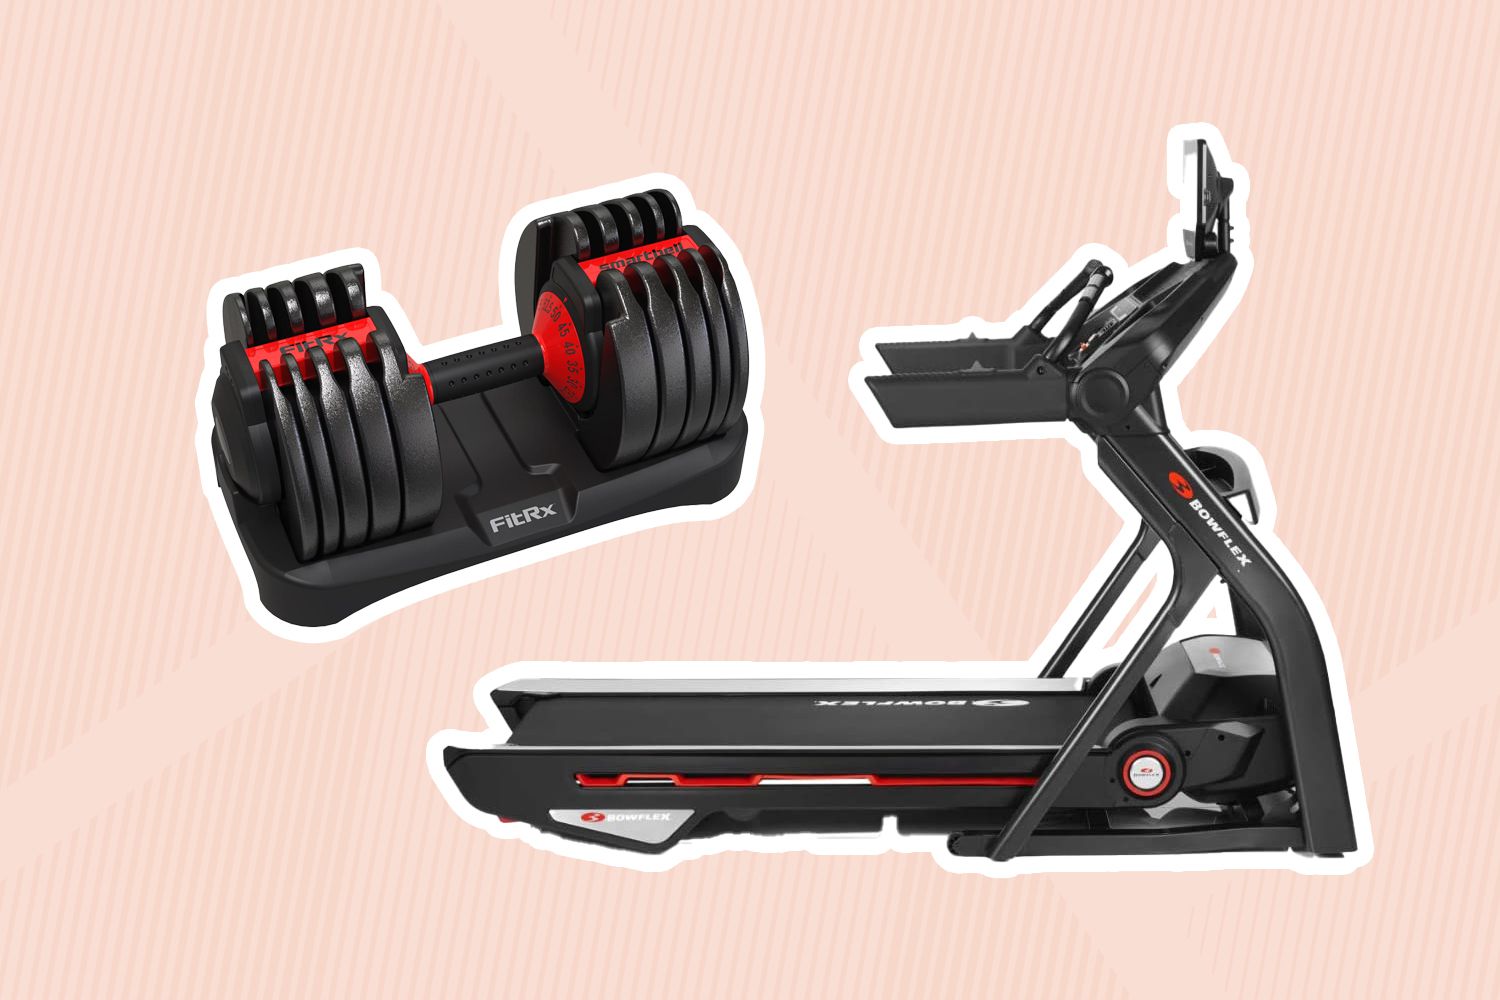 black-friday-workout-equipment-deals-for-your-home-gym-vwf-tout